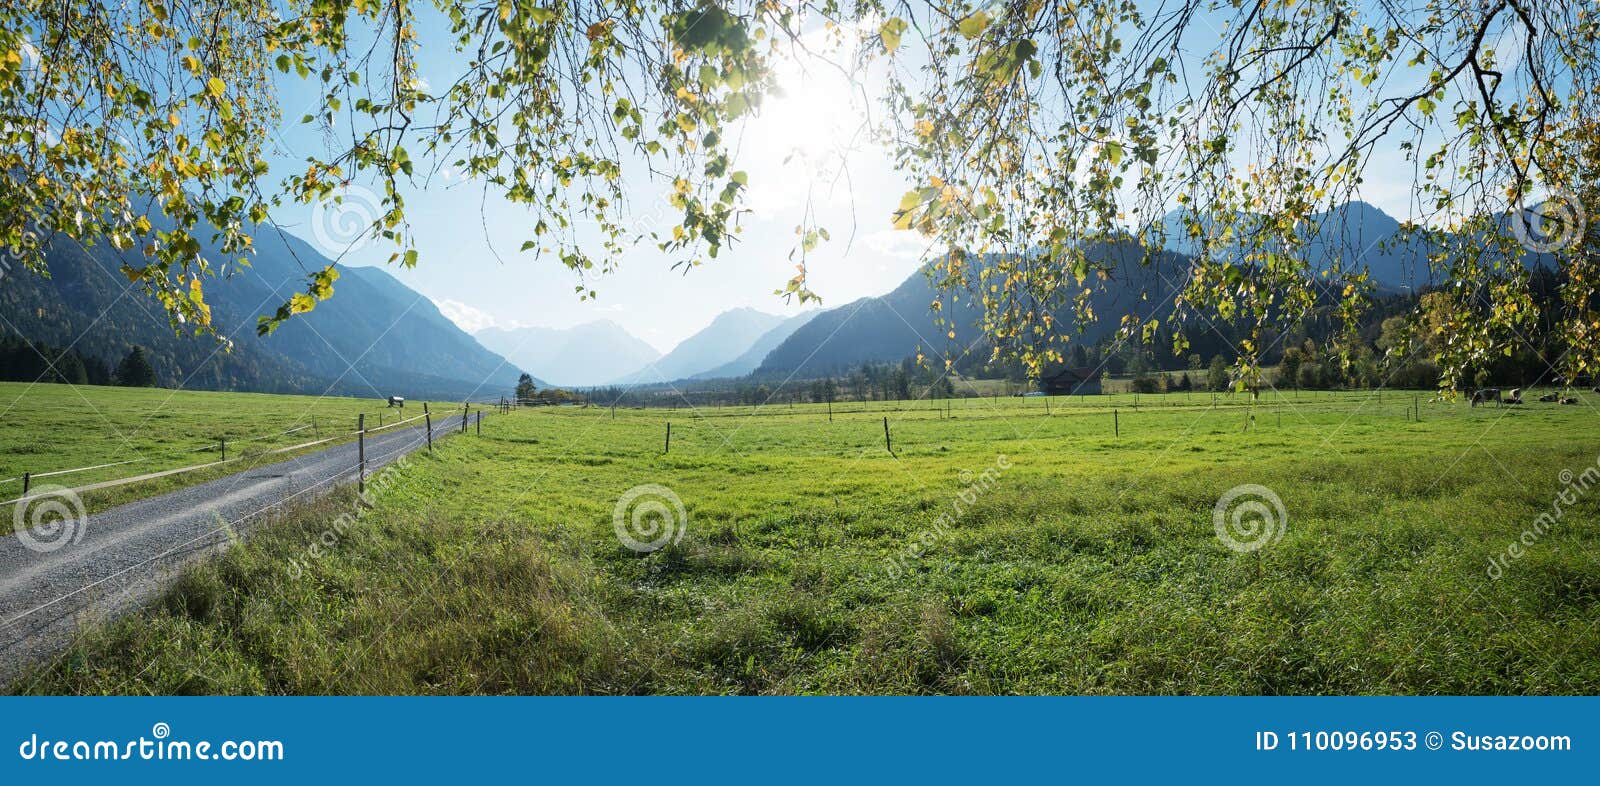 meadowland at loisach valley, beautiful spring landscape bavaria